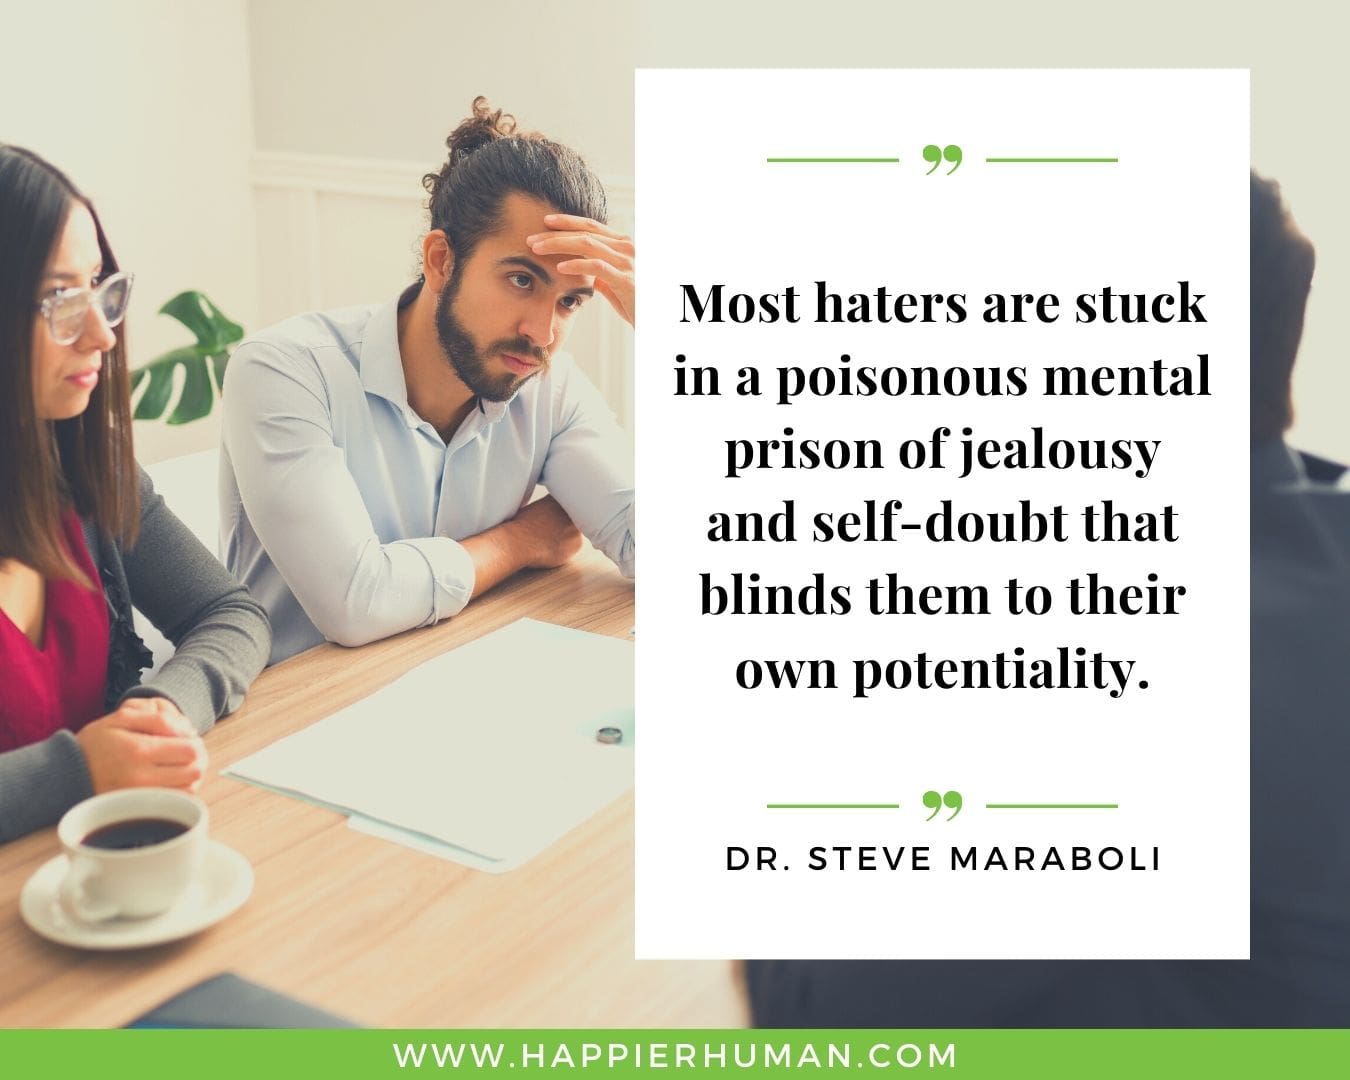 Haters Quotes - “Most haters are stuck in a poisonous mental prison of jealousy and self-doubt that blinds them to their own potentiality.” - Dr. Steve Maraboli